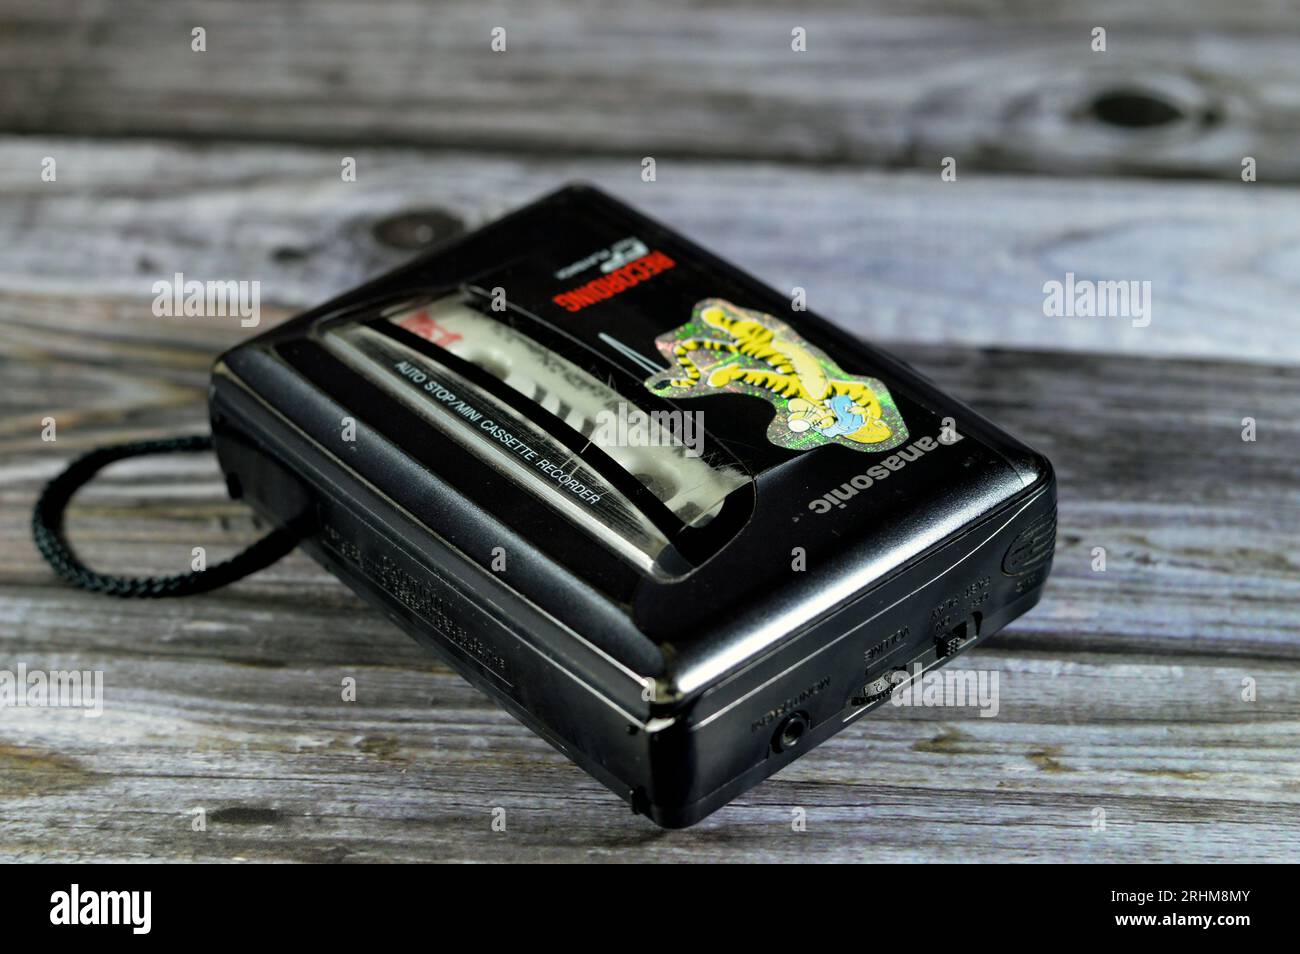 Giza, Egypt, August 12 2023: Panasonic fast playback recorder, Auto stop Mini cassette player and recorder, portable audio player, vintage retro obsol Stock Photo